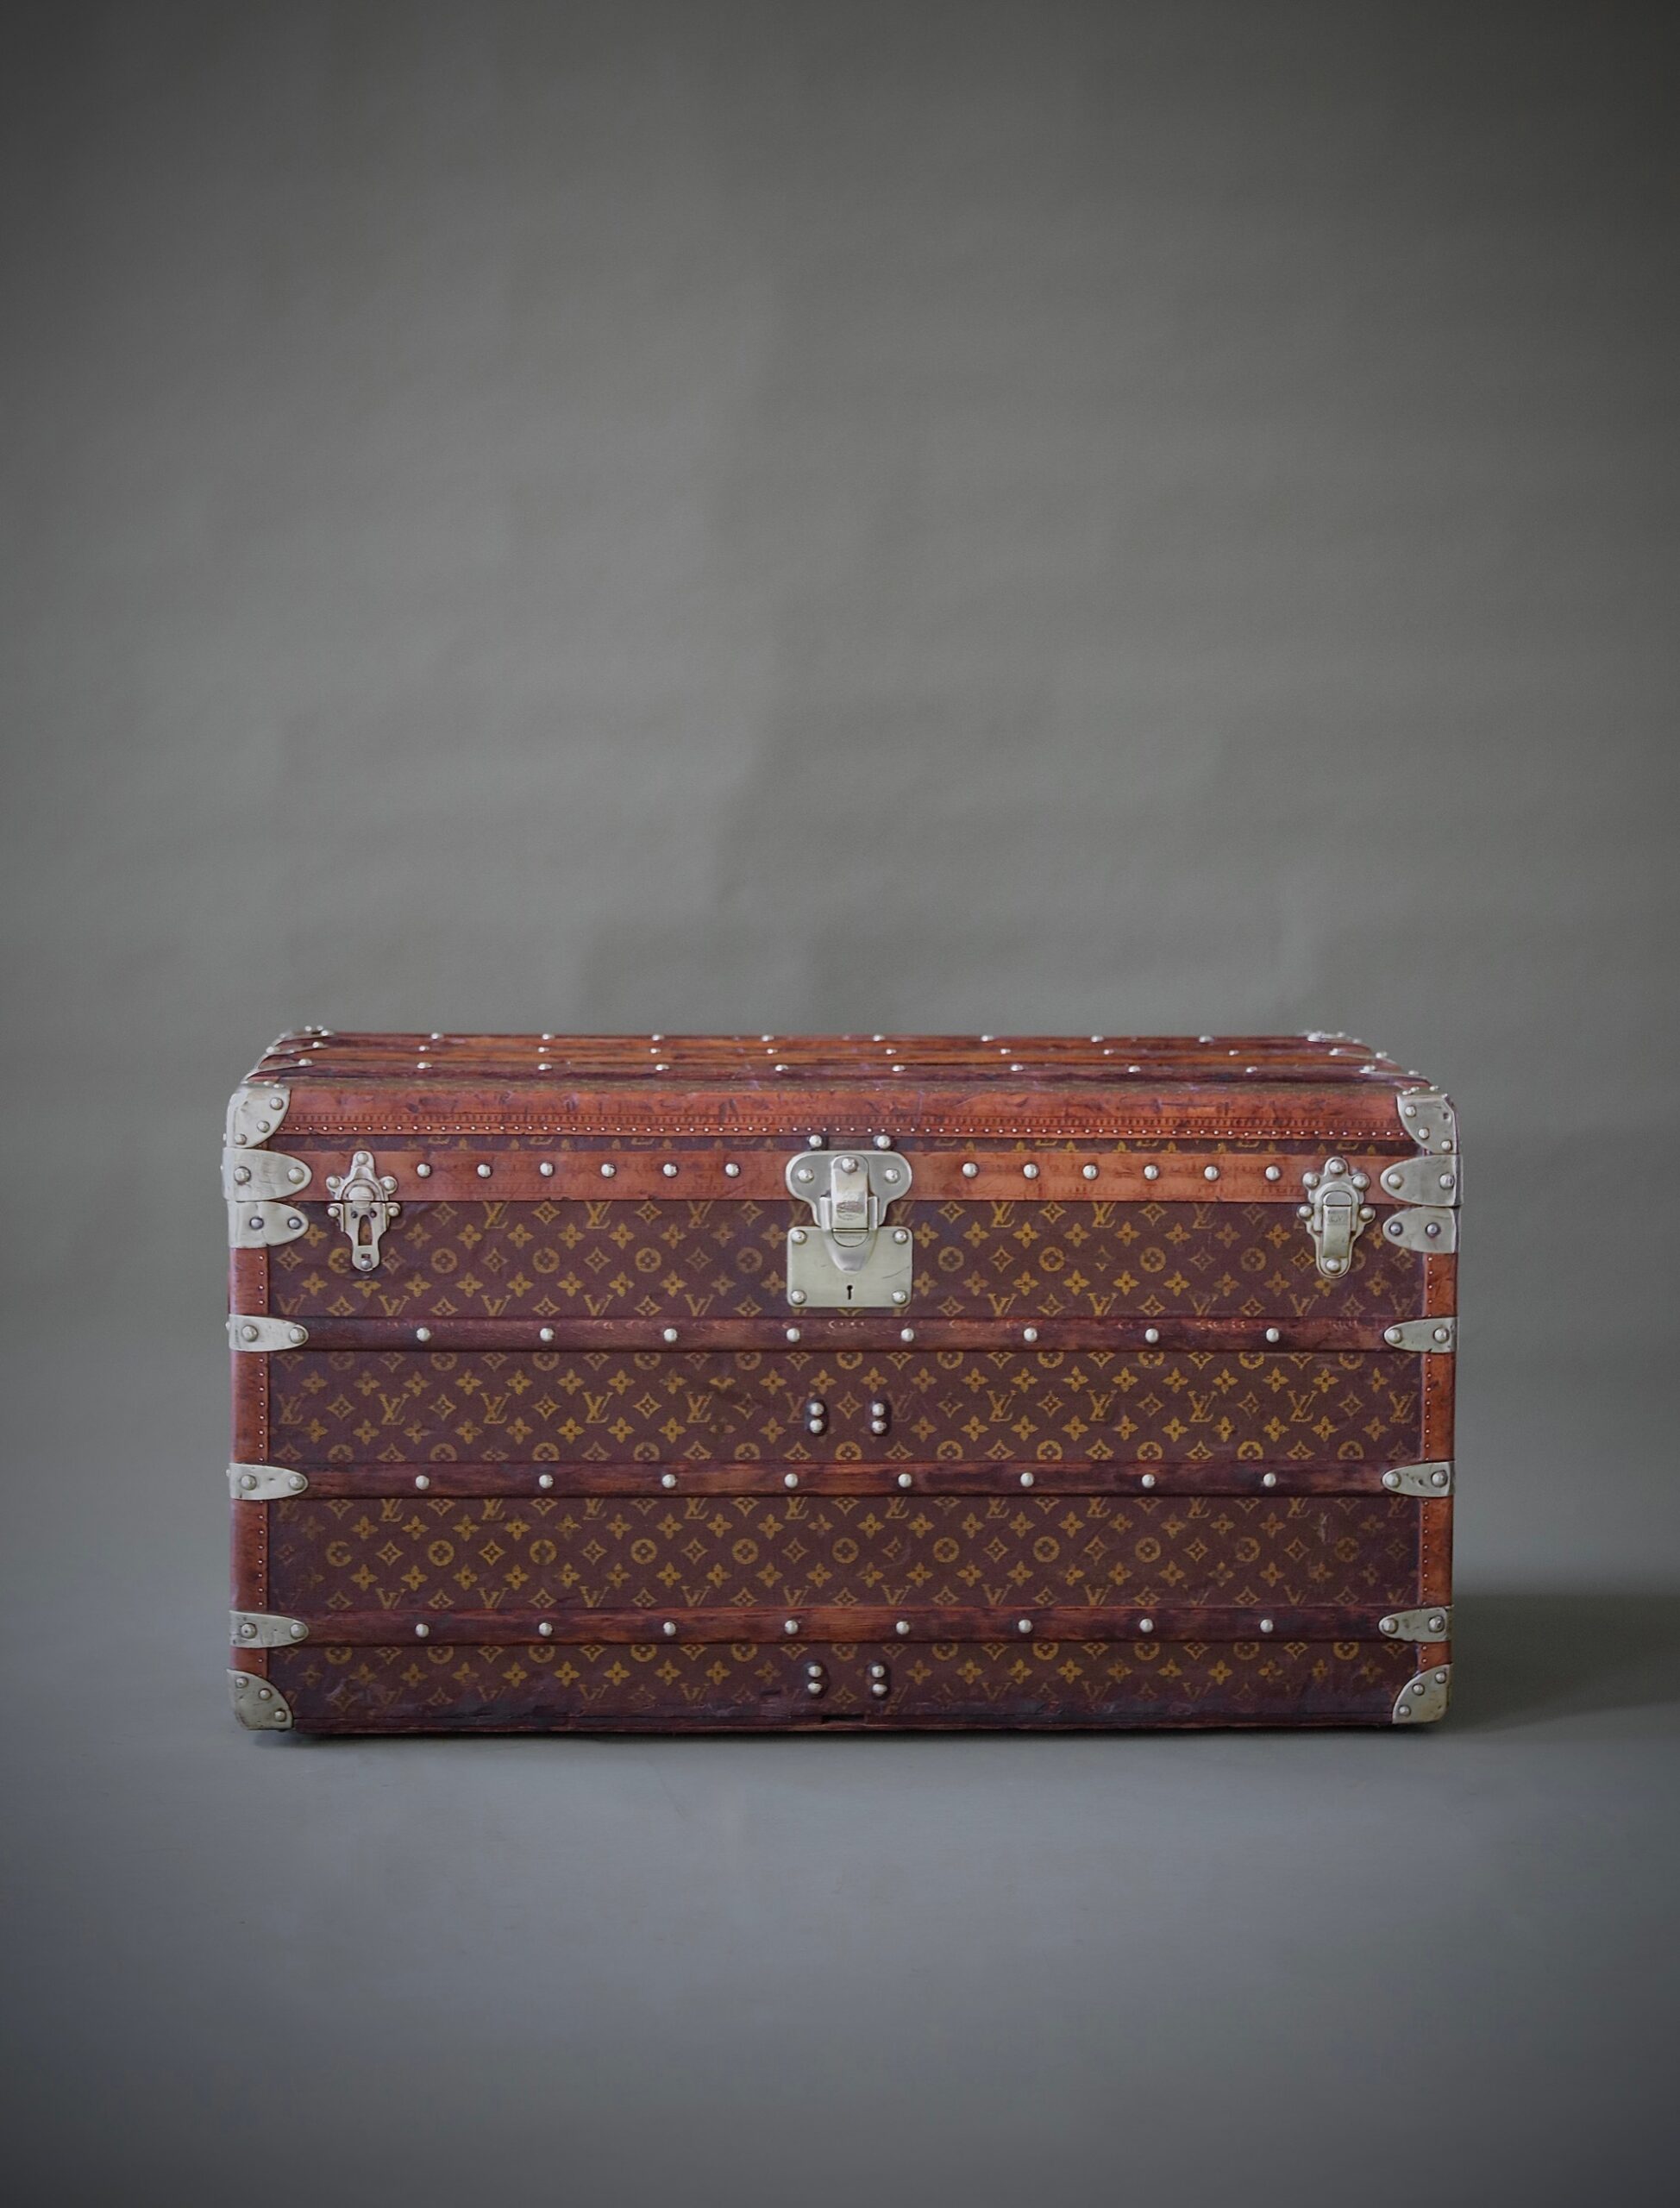 the-well-traveled-trunk-louis-vuitton-thumbnail-product-5761-1